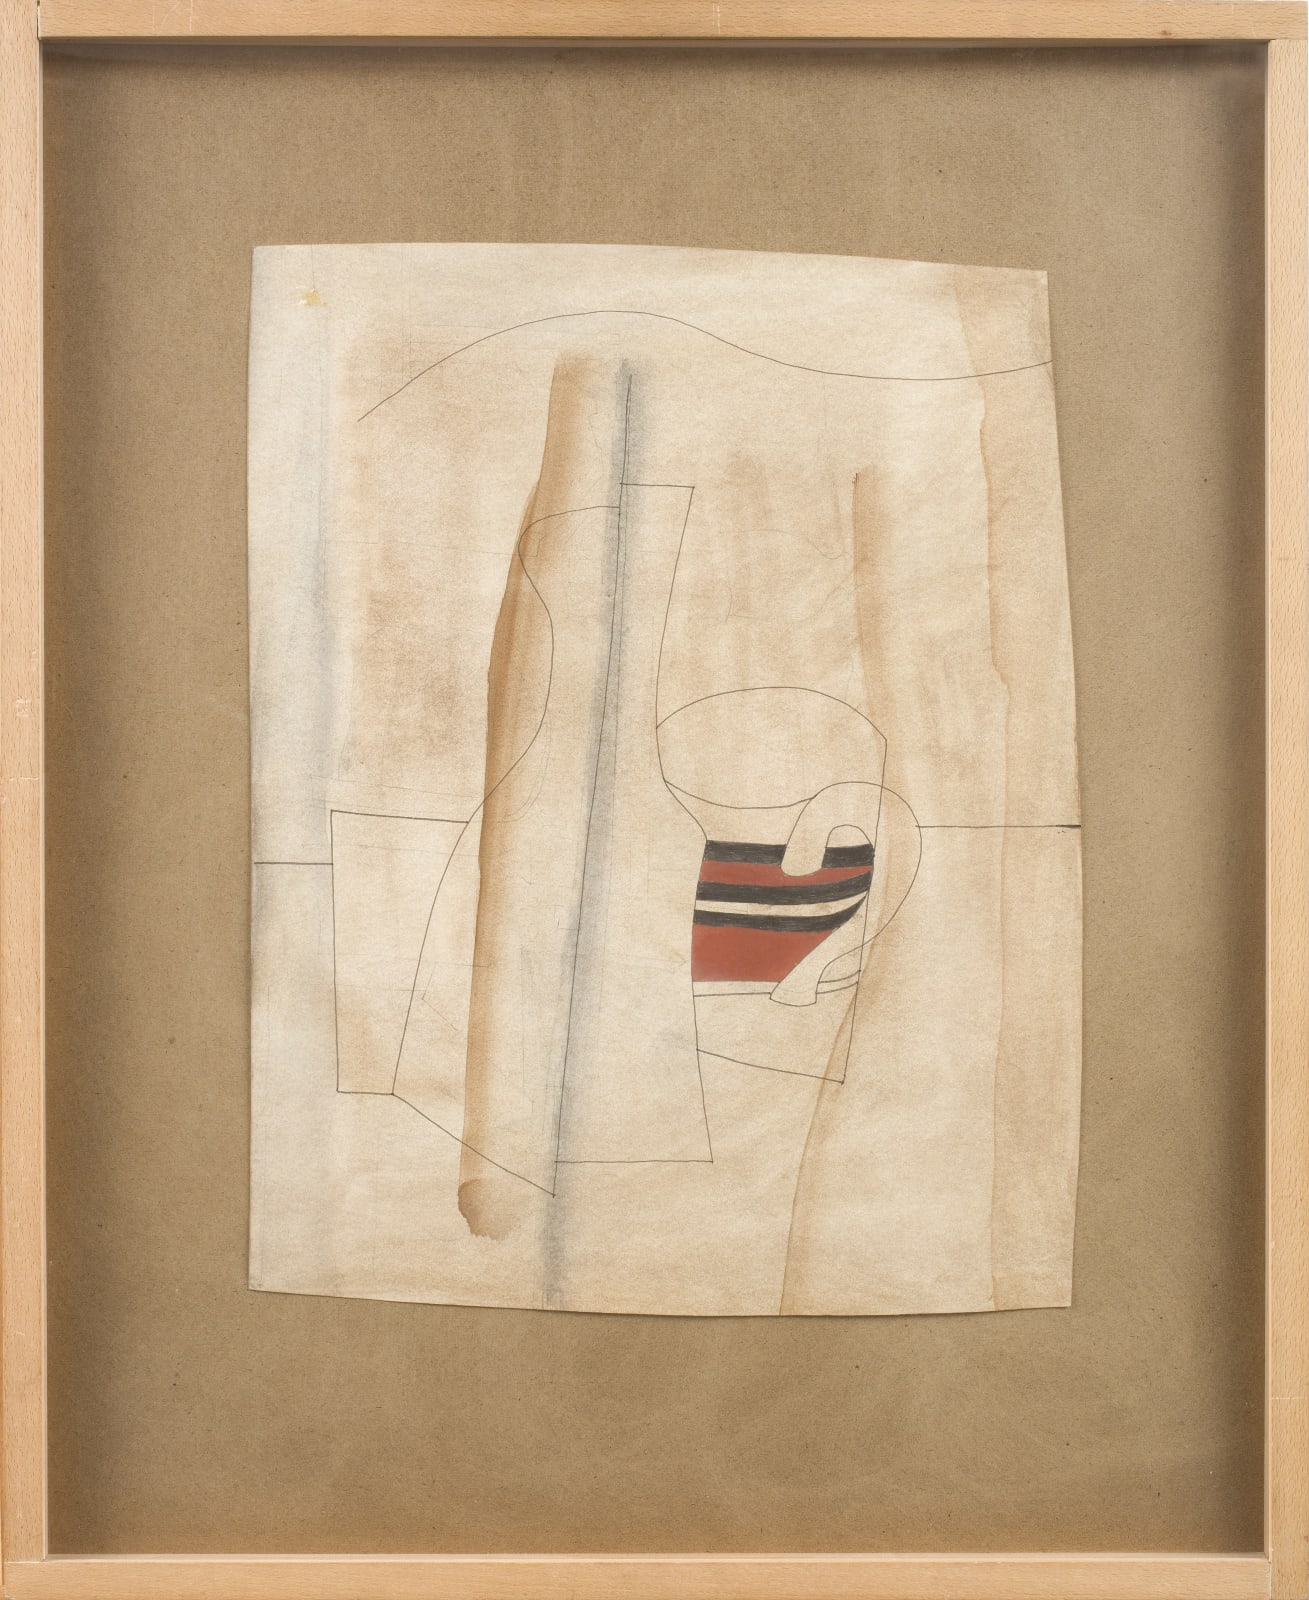 Ben Nicholson, Off brown and red and striped mug, 1979